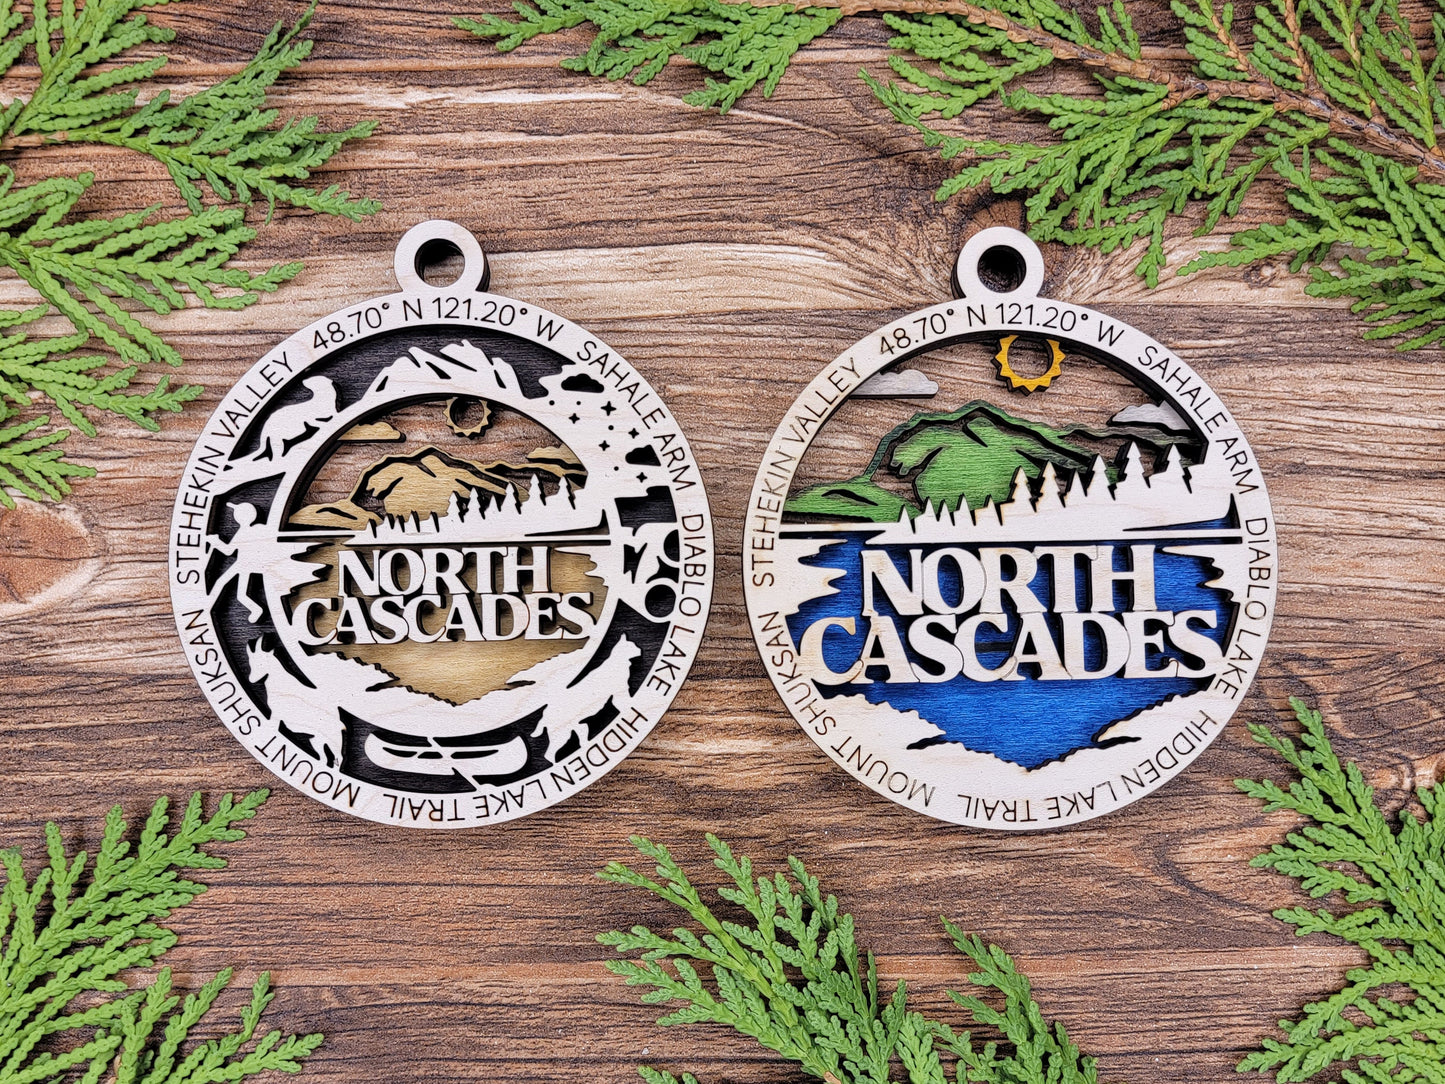 North Cascades Park Ornament - Includes 2 Ornaments - Laser Design SVG, PDF, AI File Download - Tested On Glowforge and LightBurn